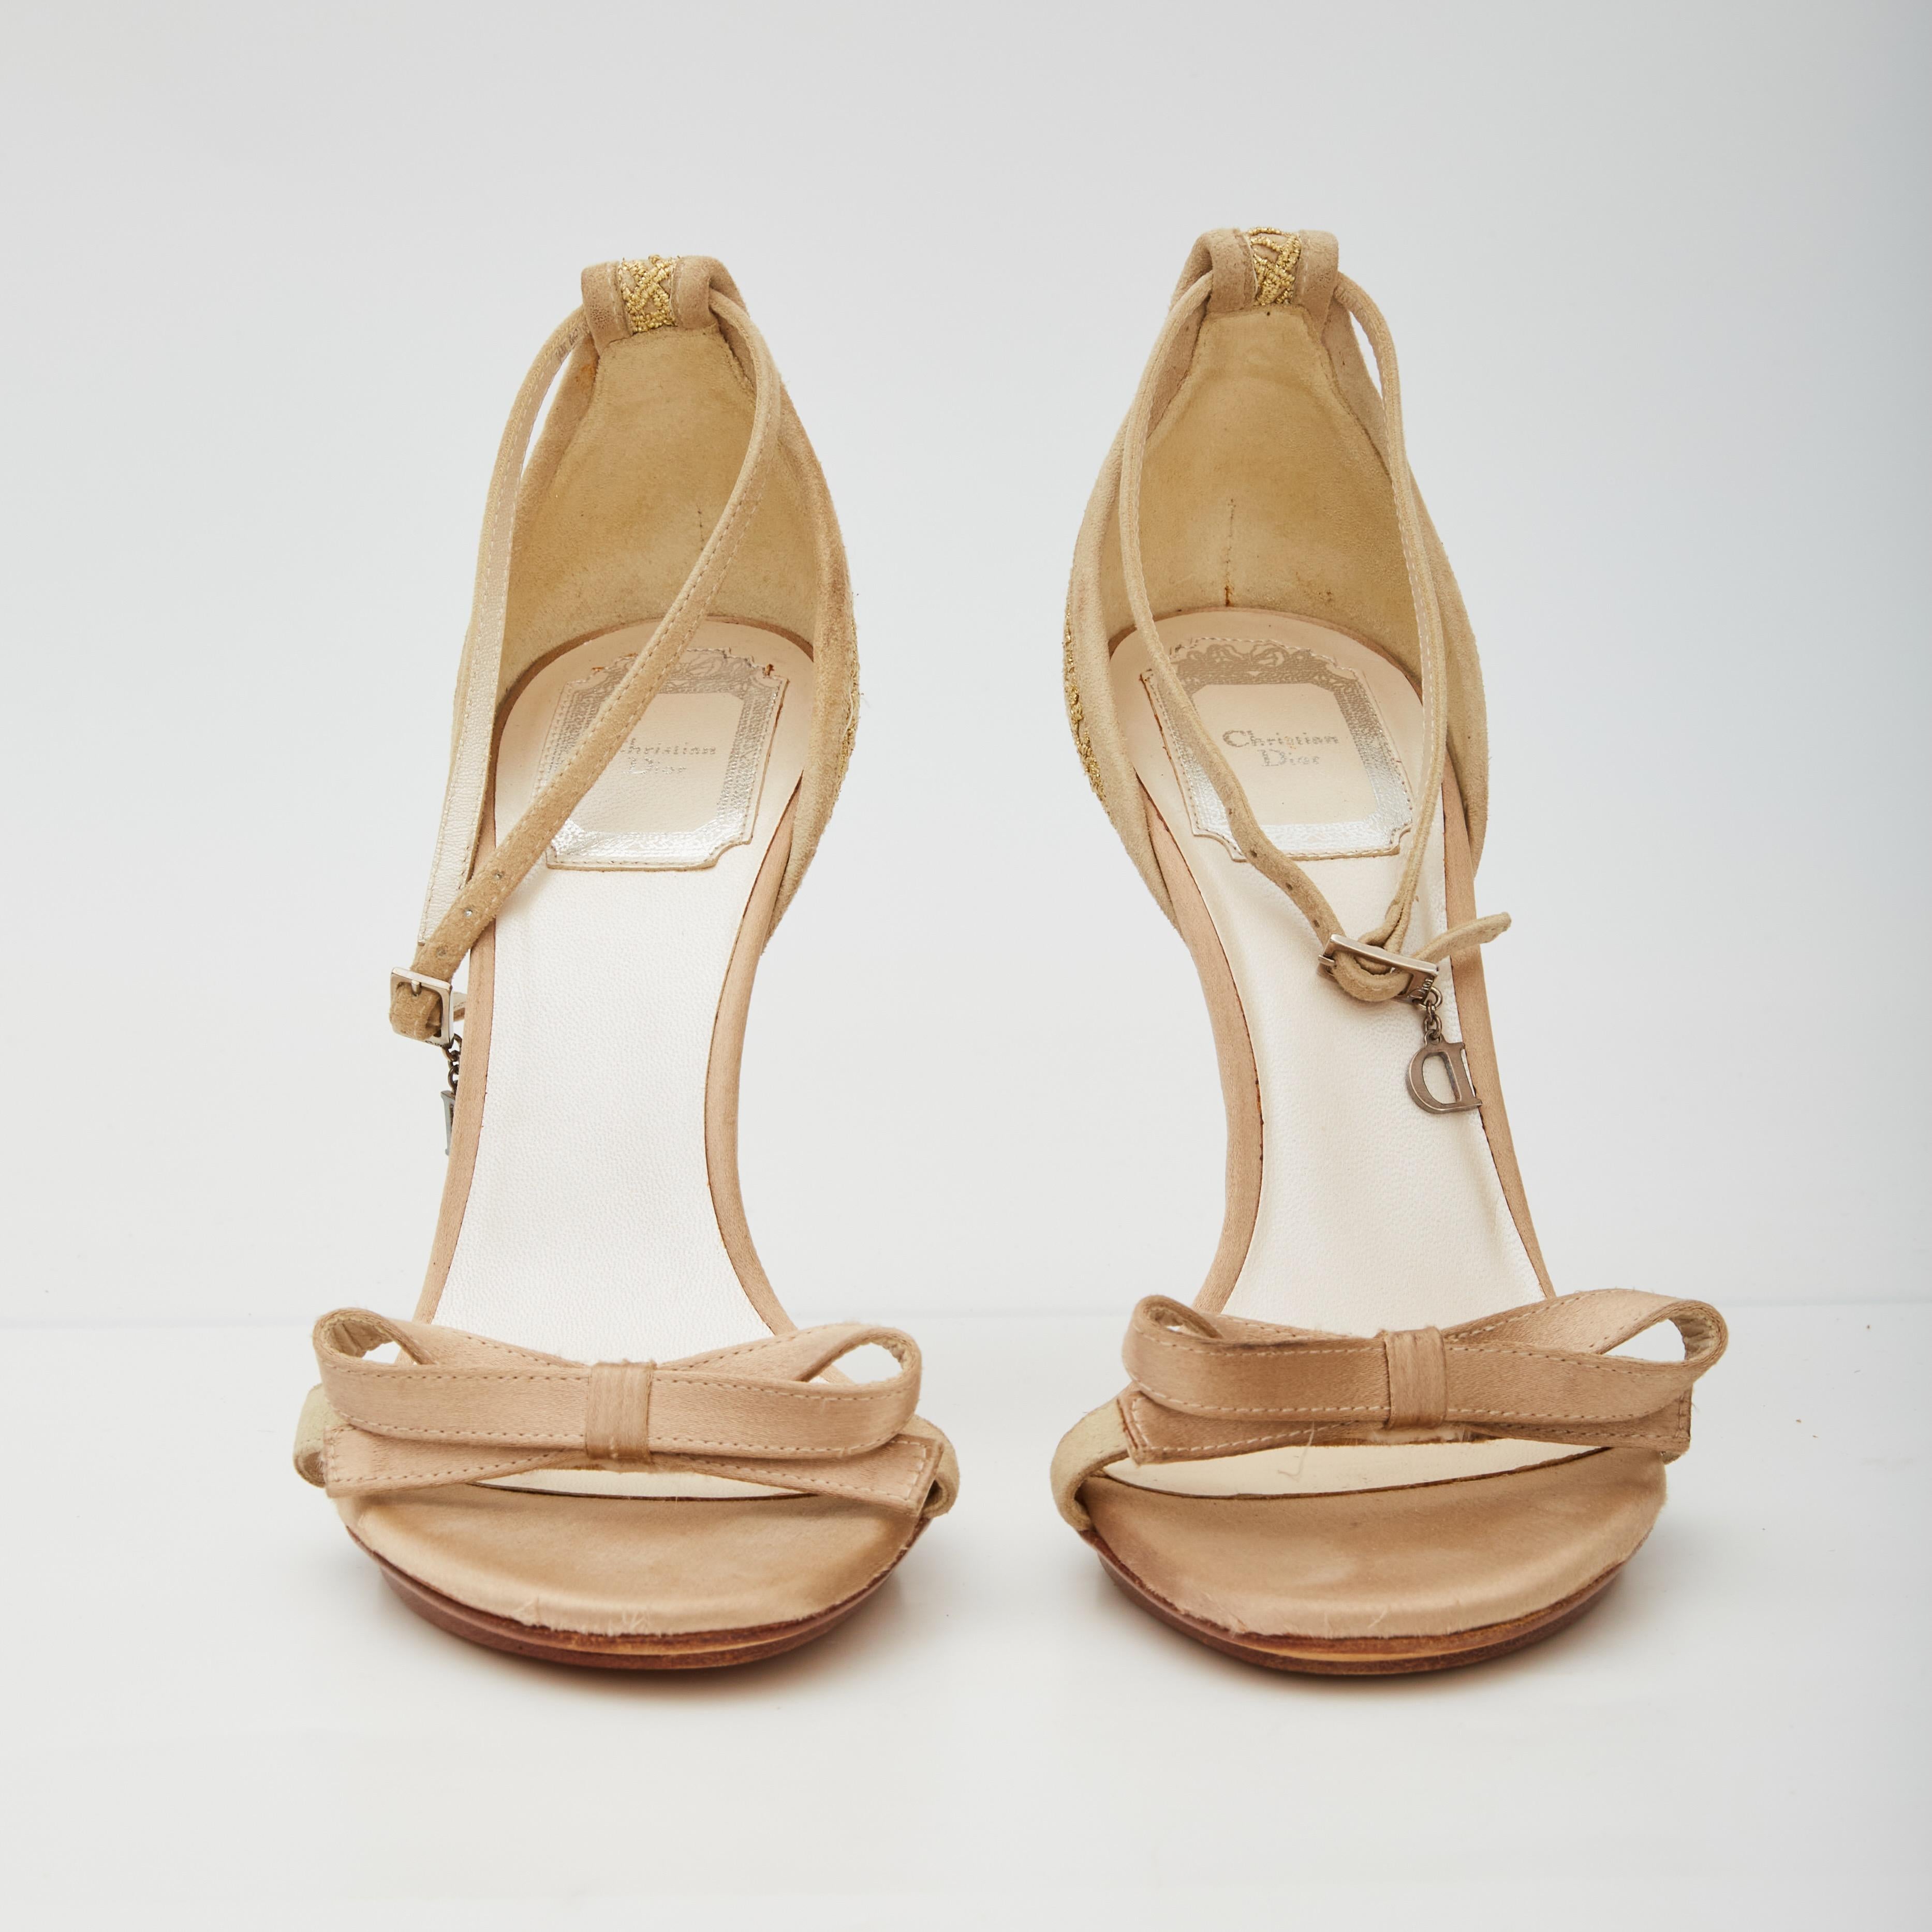 COLOR: Gold
MATERIAL: Silk embellished uppers/leather bottoms
SIZE: 37 EU / 6 US
HEEL HEIGHT: 100 mm / 4”
COMES WITH: Dust bag and box 
CONDITION: Very good - looks never used. Like new with the exception of discoloration marks to the side of one